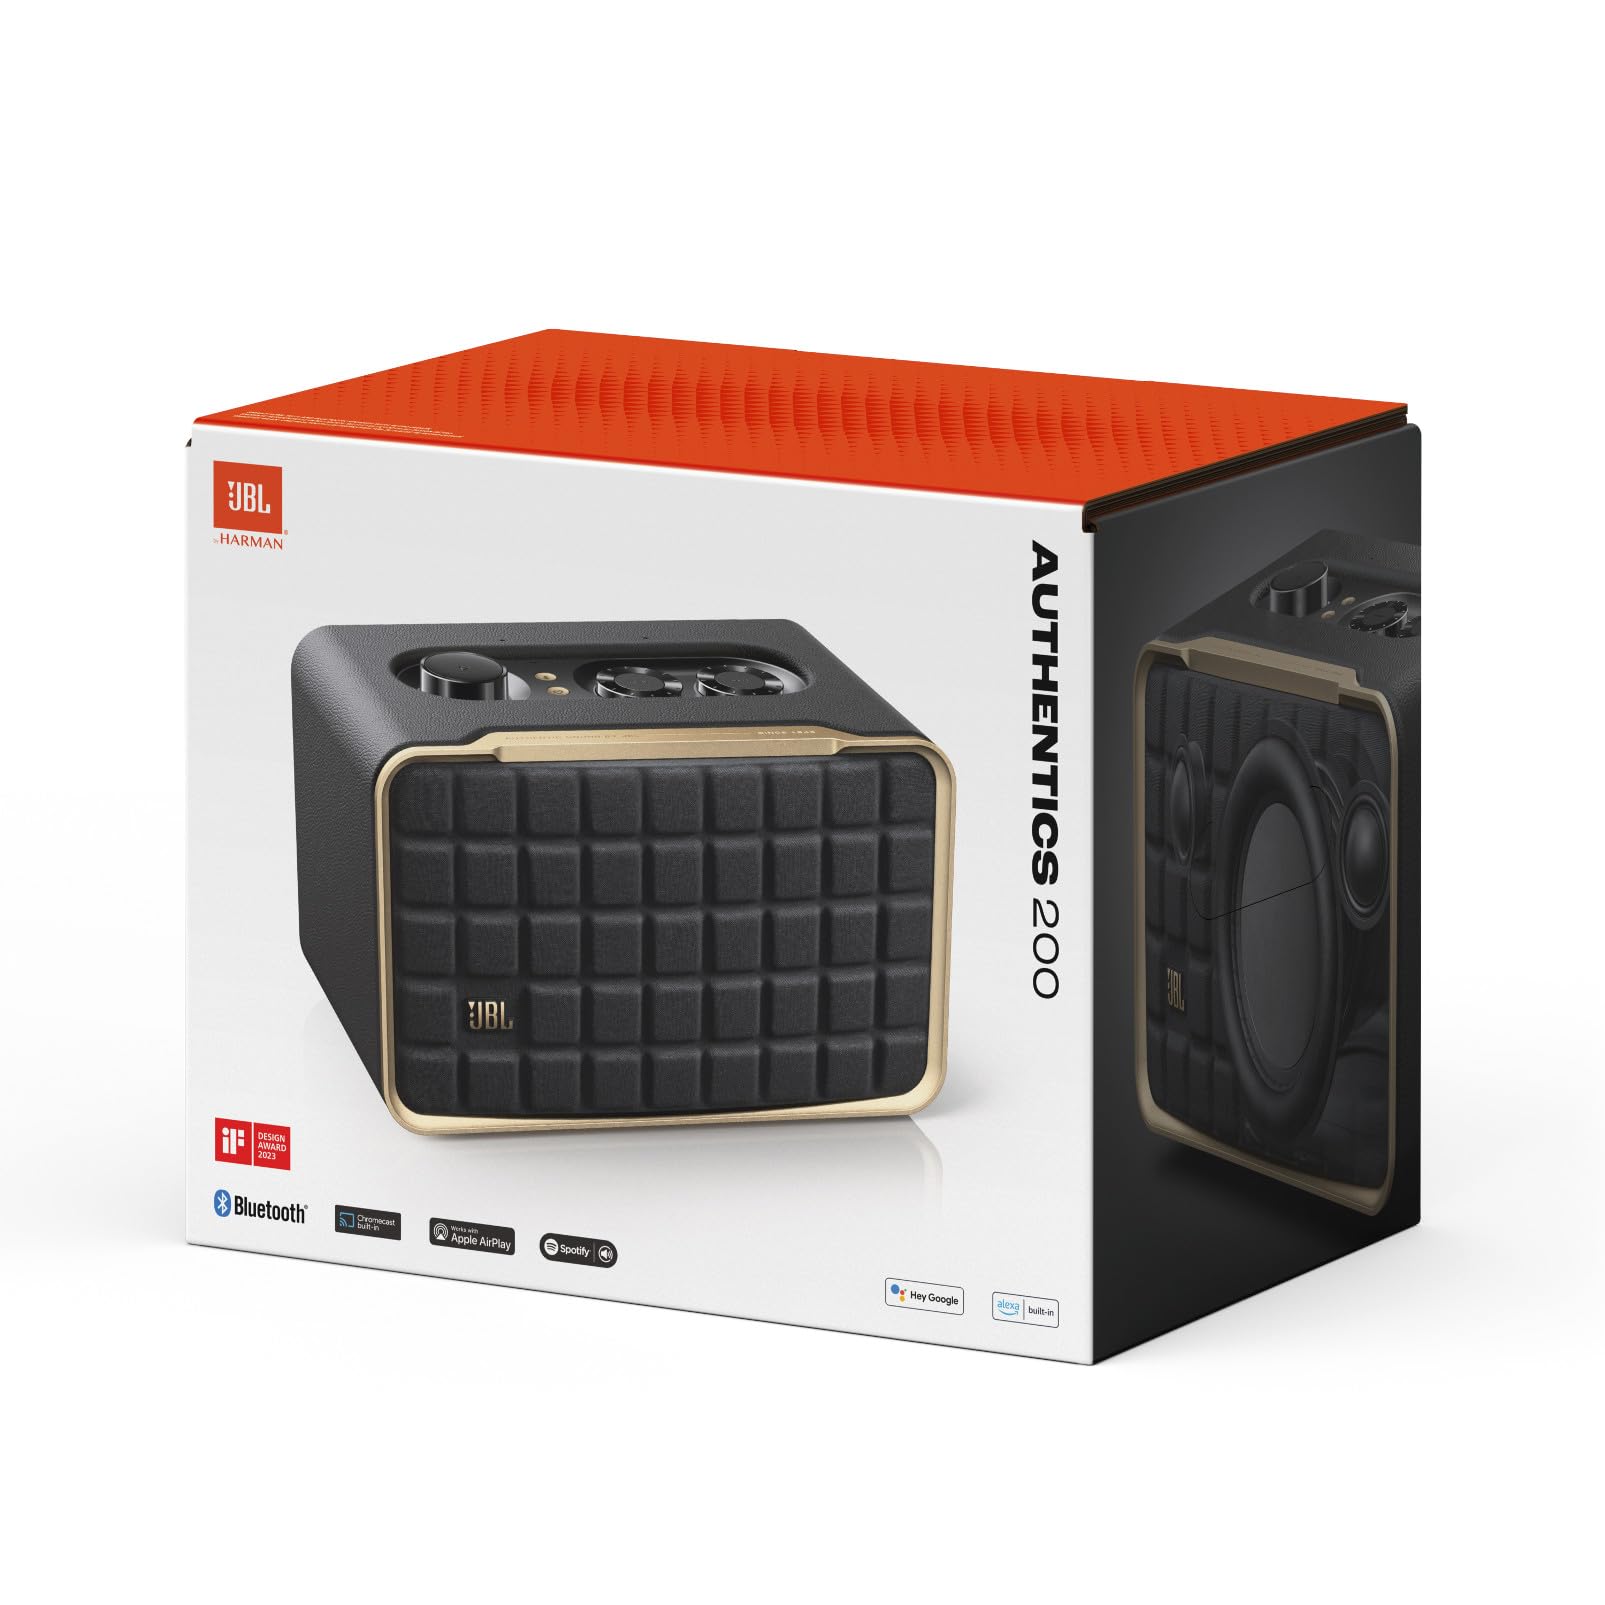 JBL Authentics 200 - Wireless Home Speaker, Built in Wi-Fi, Bluetooth and Voice Assistants, Built in Alexa and Google Assistant